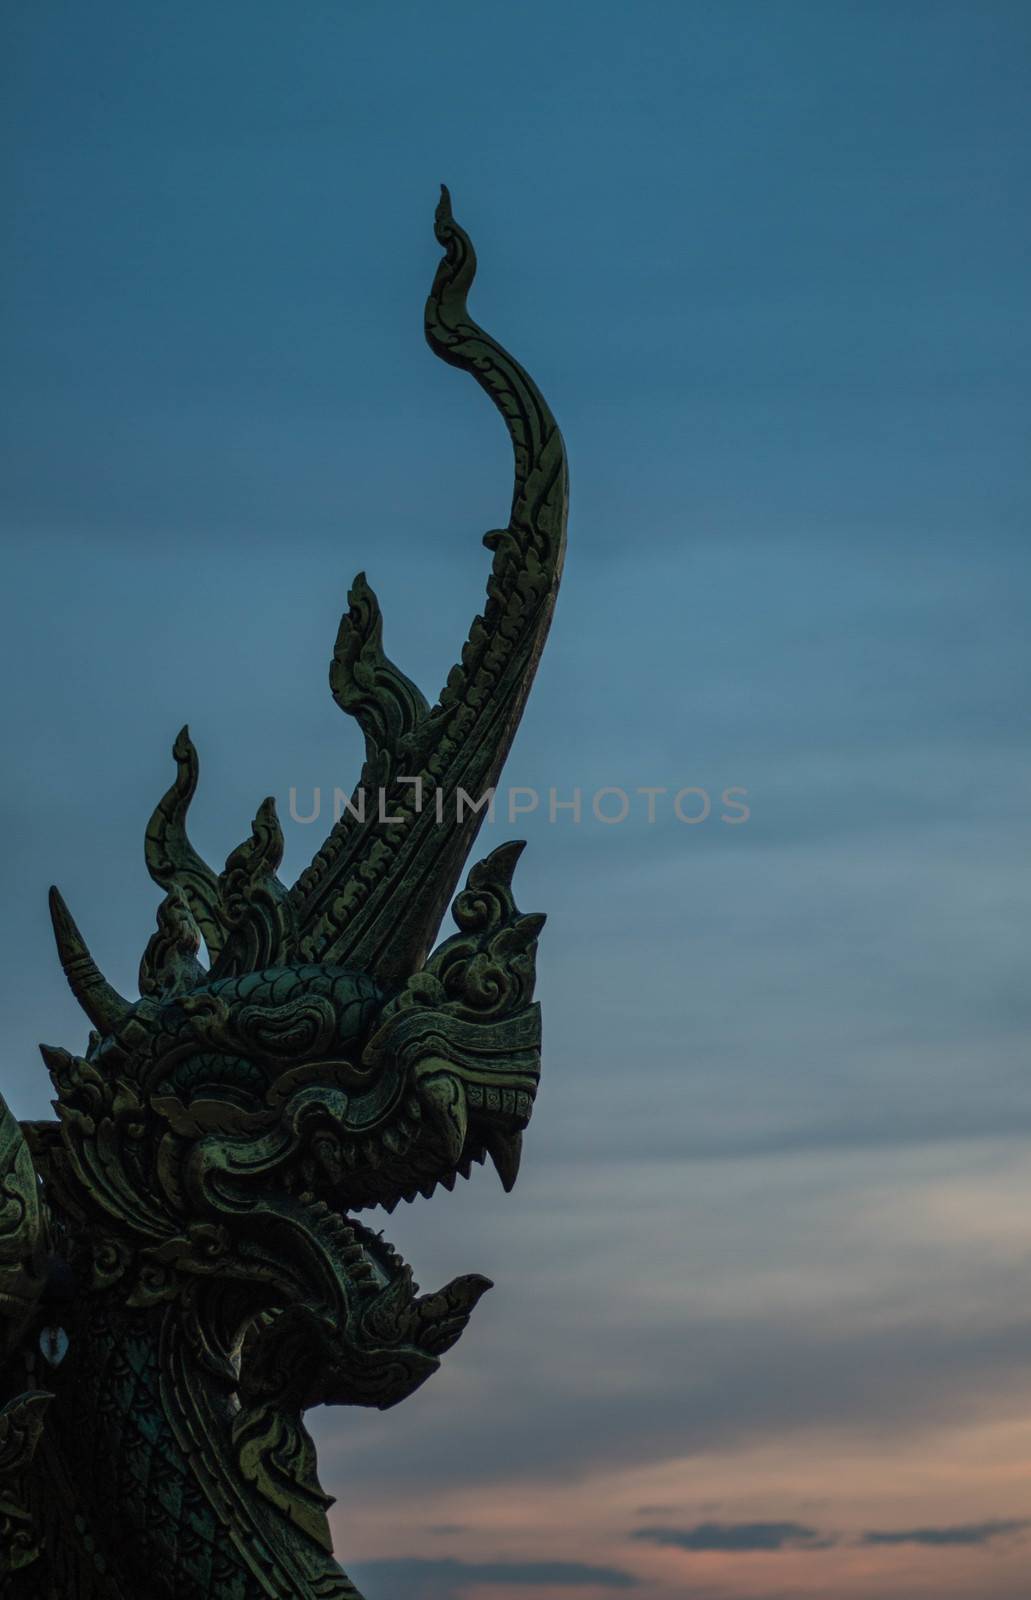 beautiful naga statue or King of nagas Serpent animal in Buddhist legend